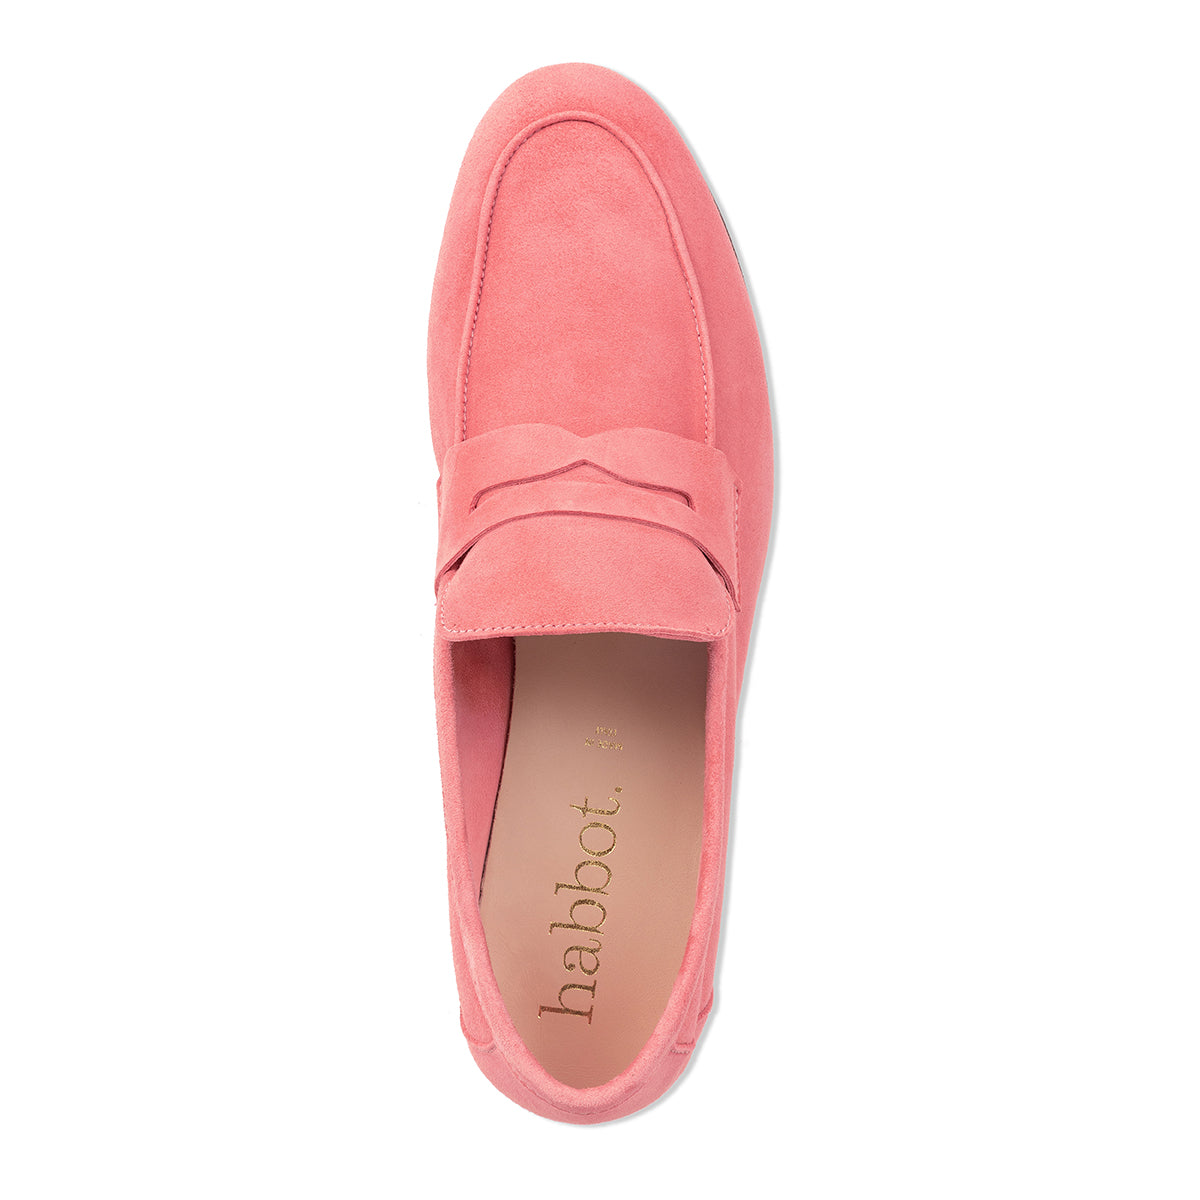 'paullo' women's soft pink suede loafers - made in Italy | habbot